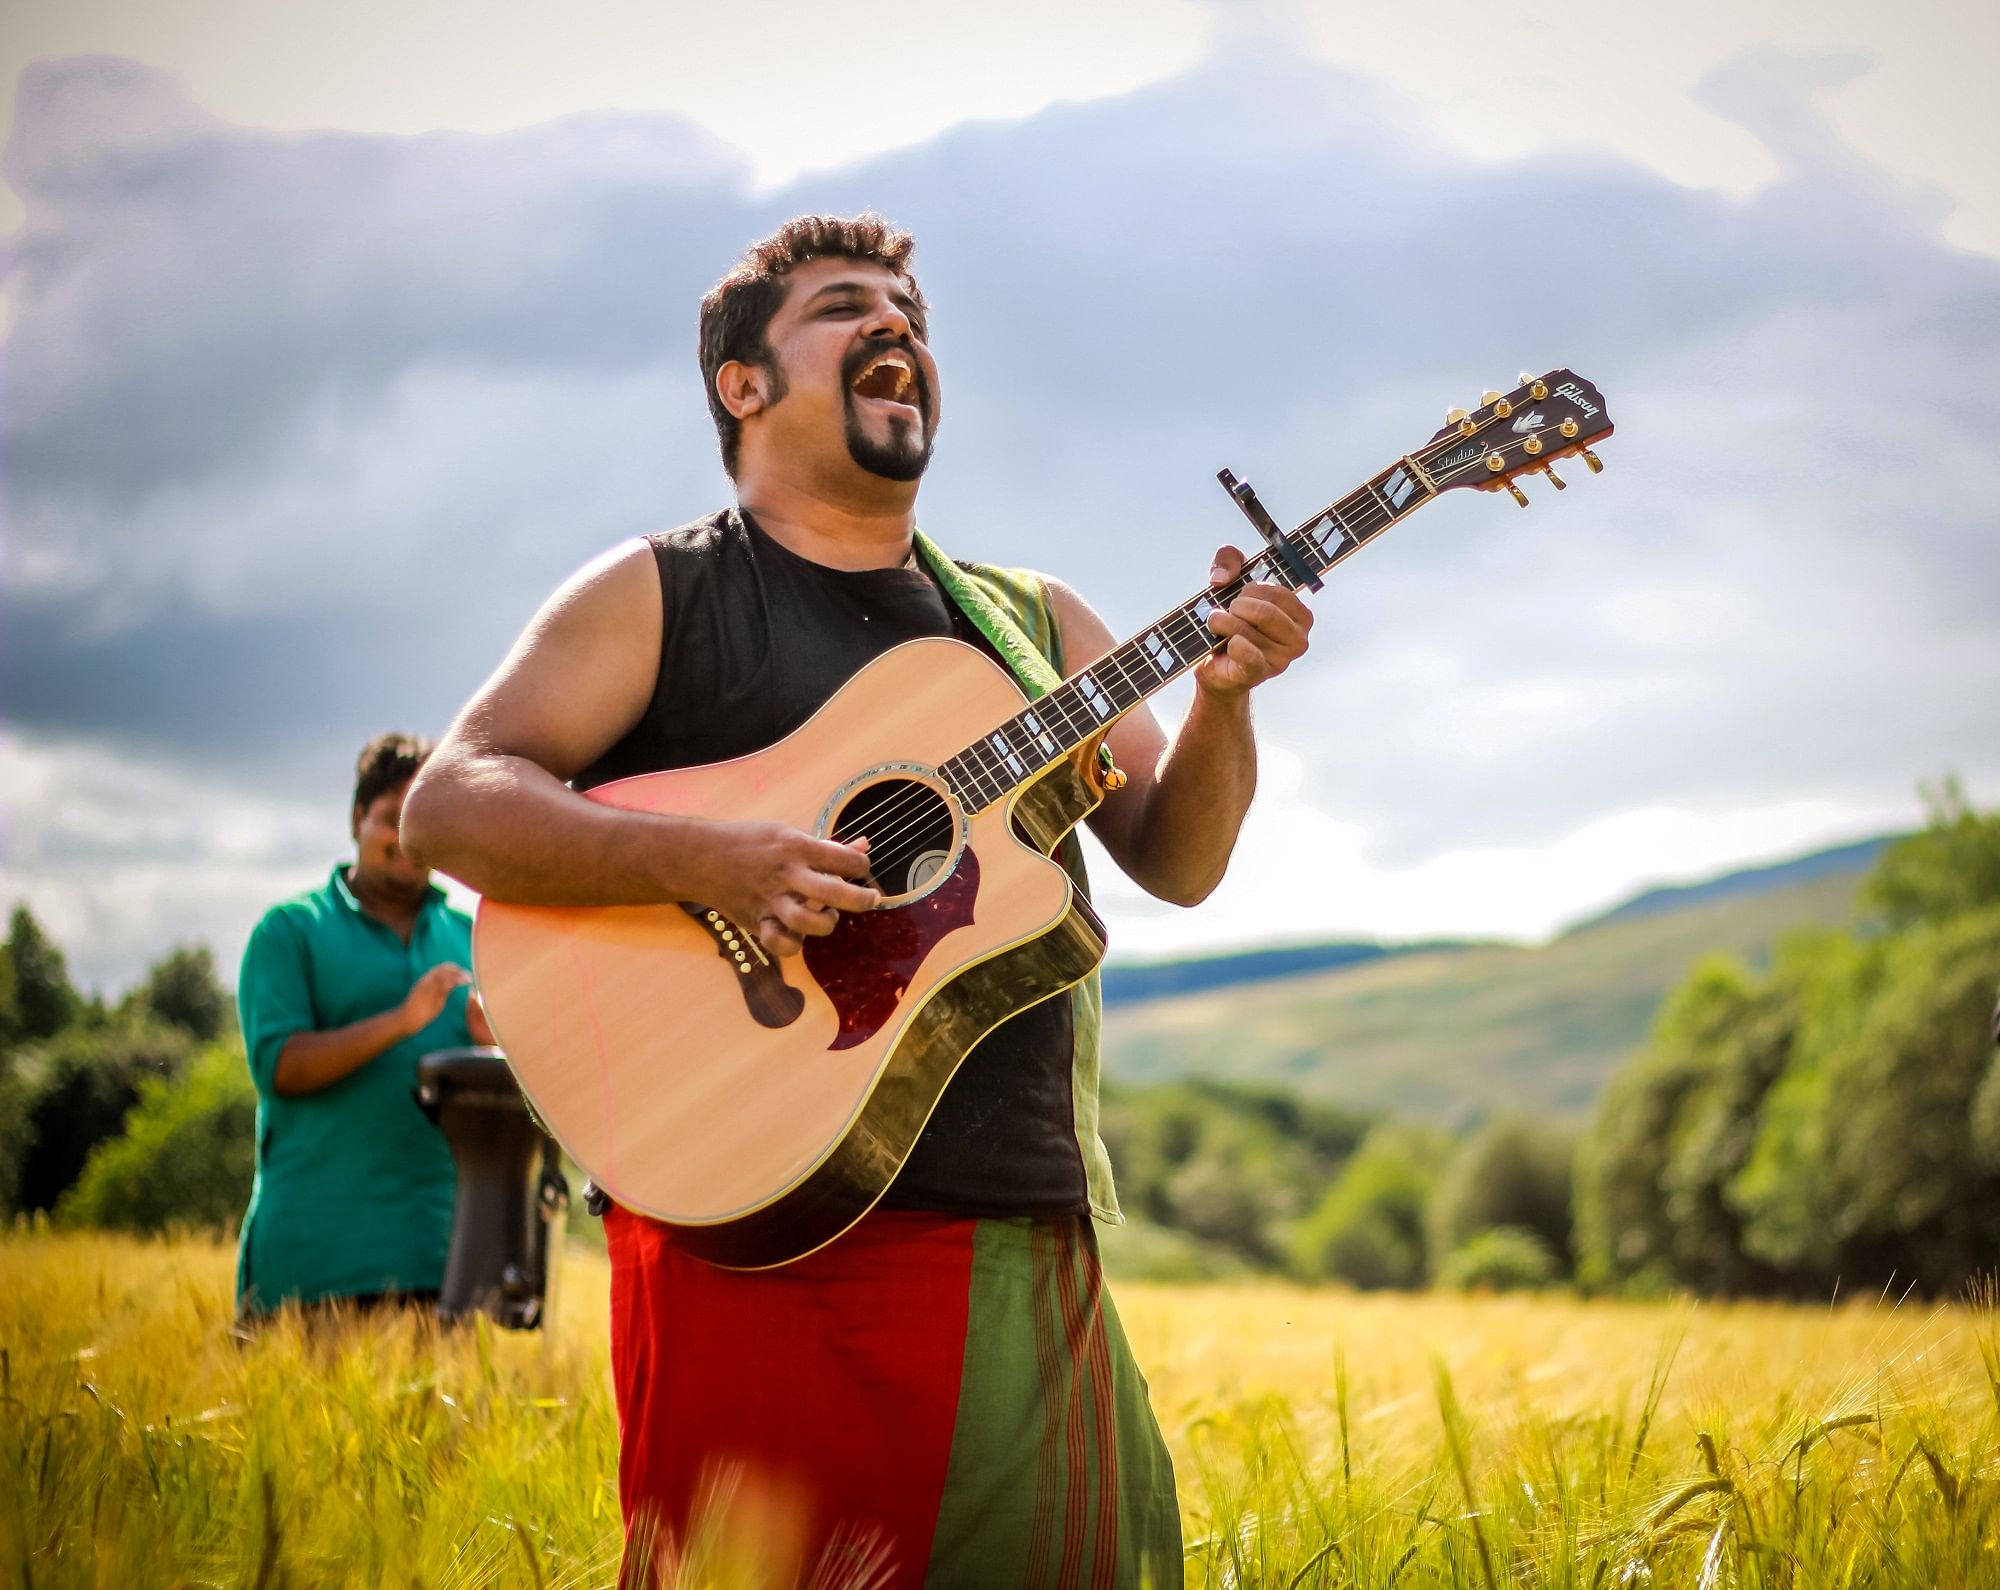 Raghu Dixit has sung and composed songs for ‘Koode’ releasing on July 13.